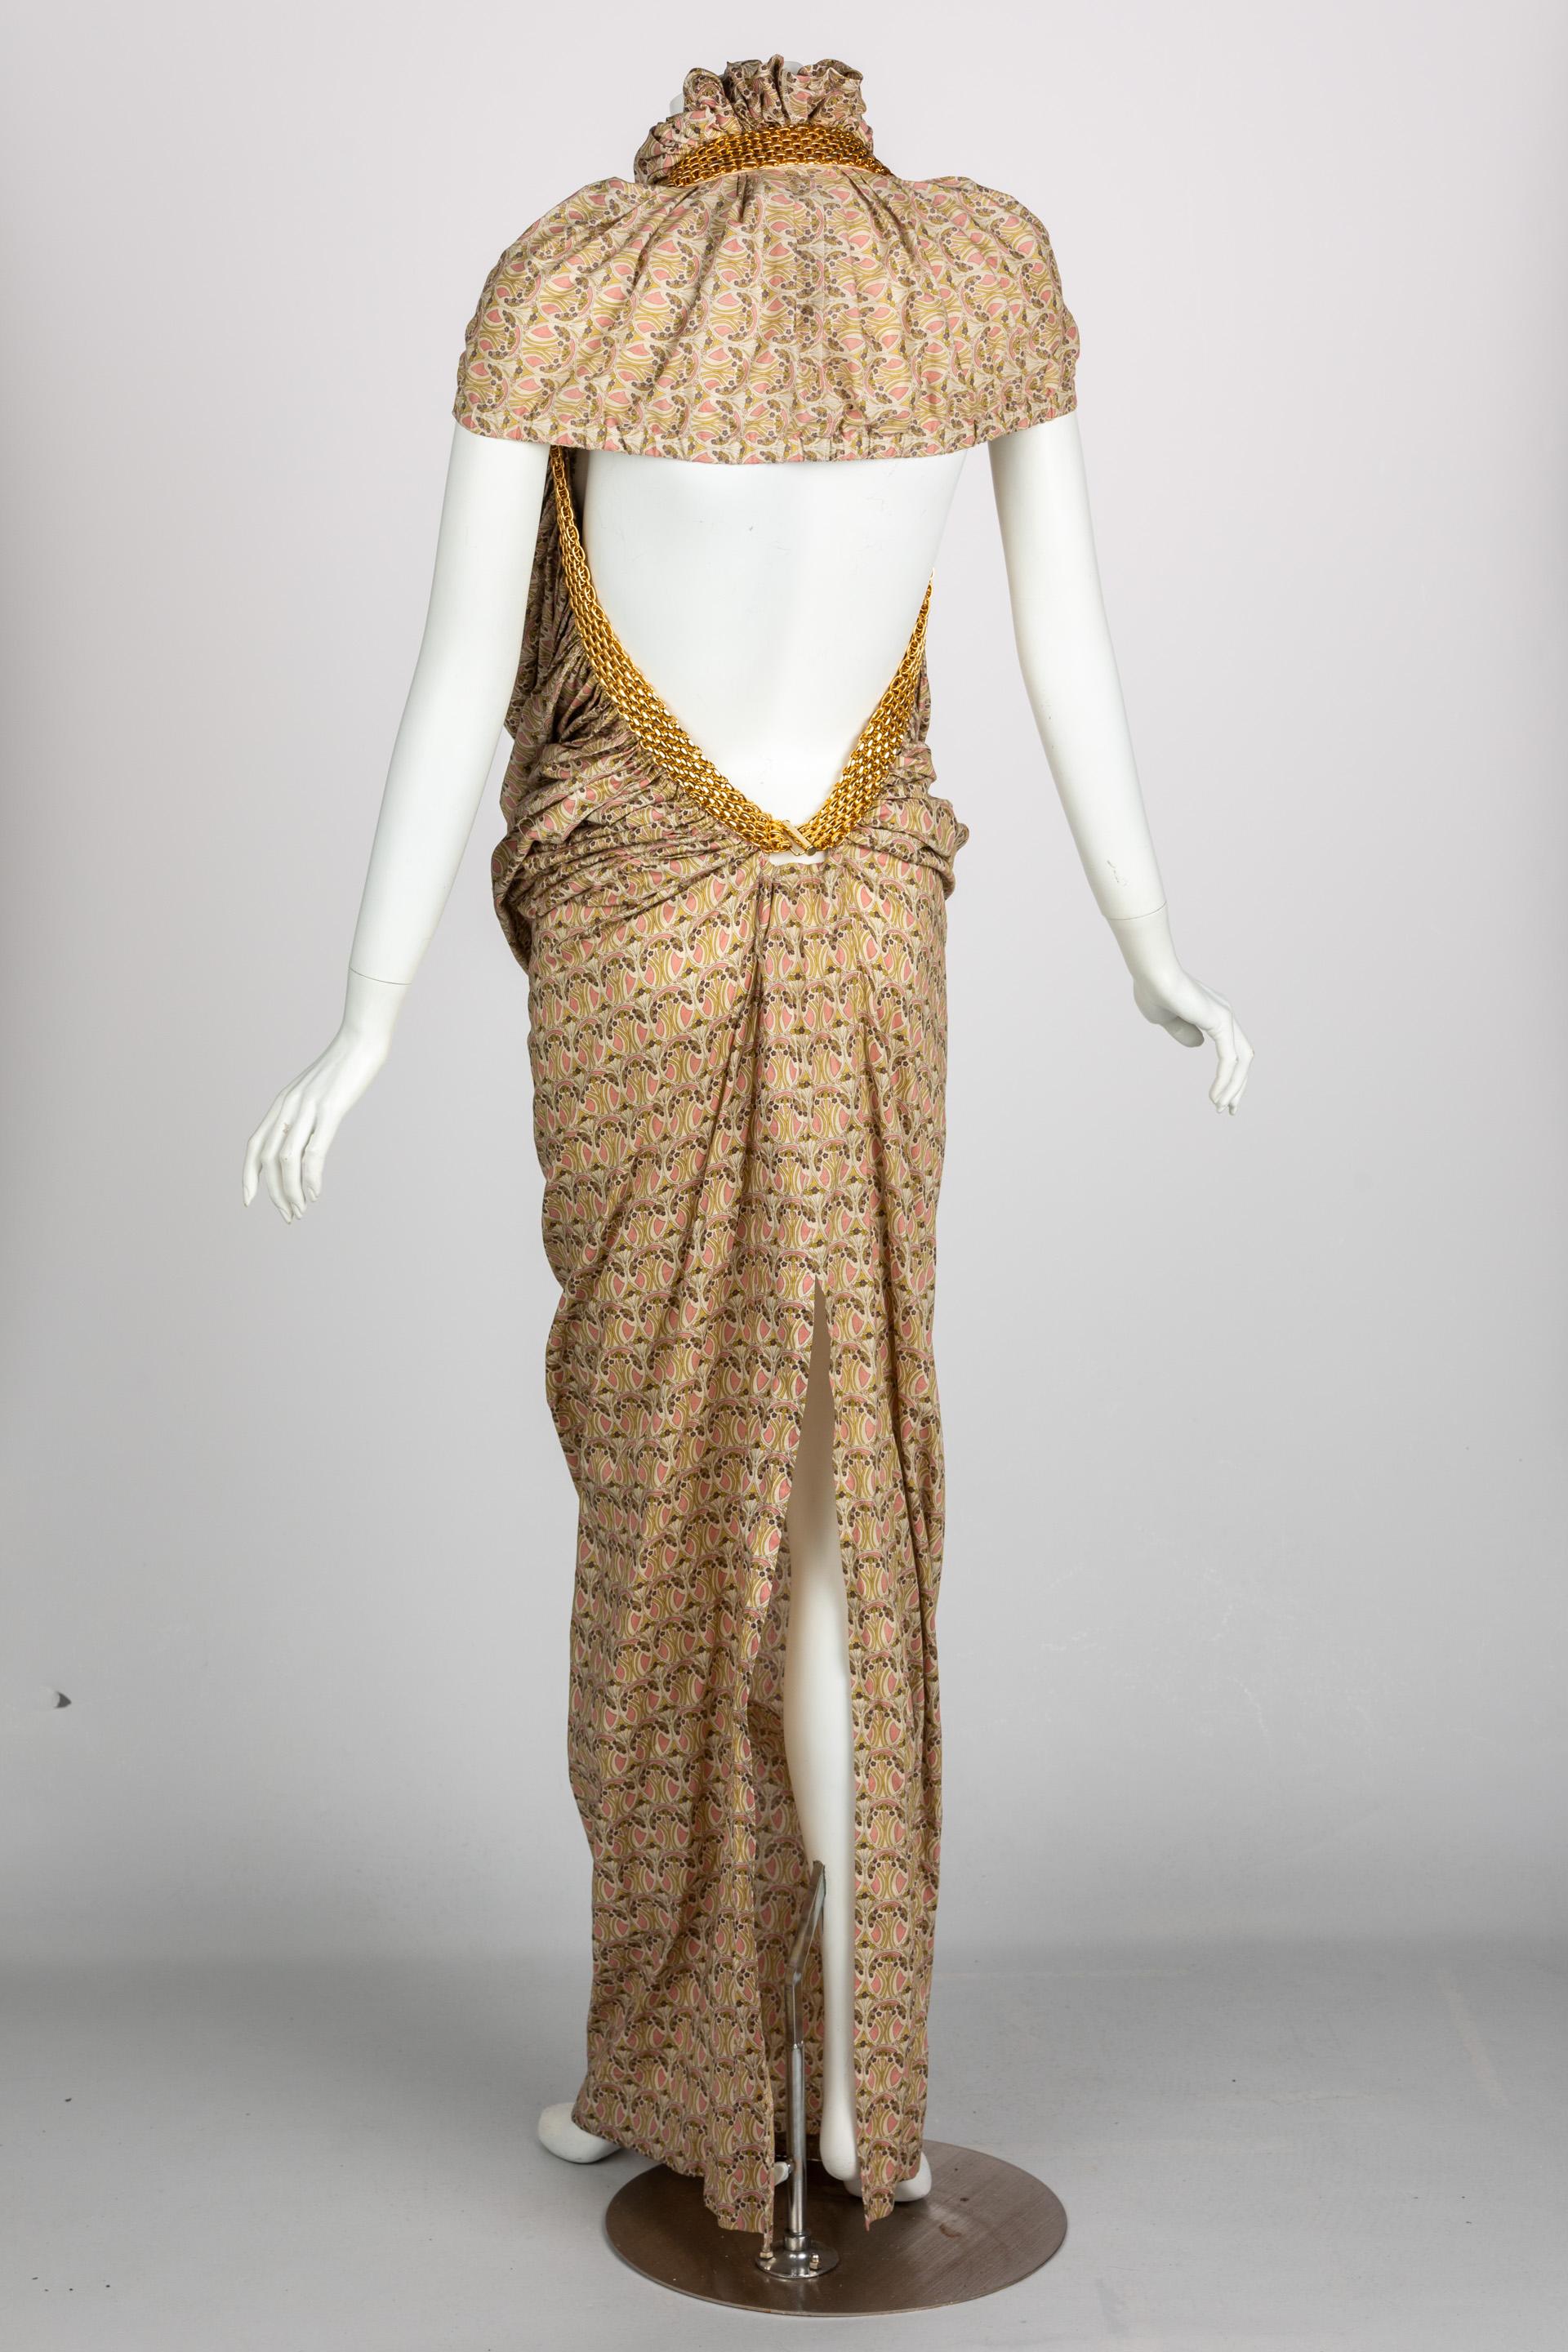 Junya Watanabe Comme des Garcons Floral Gold Chain Cut Out Back Dress, 2008 In Excellent Condition For Sale In Boca Raton, FL